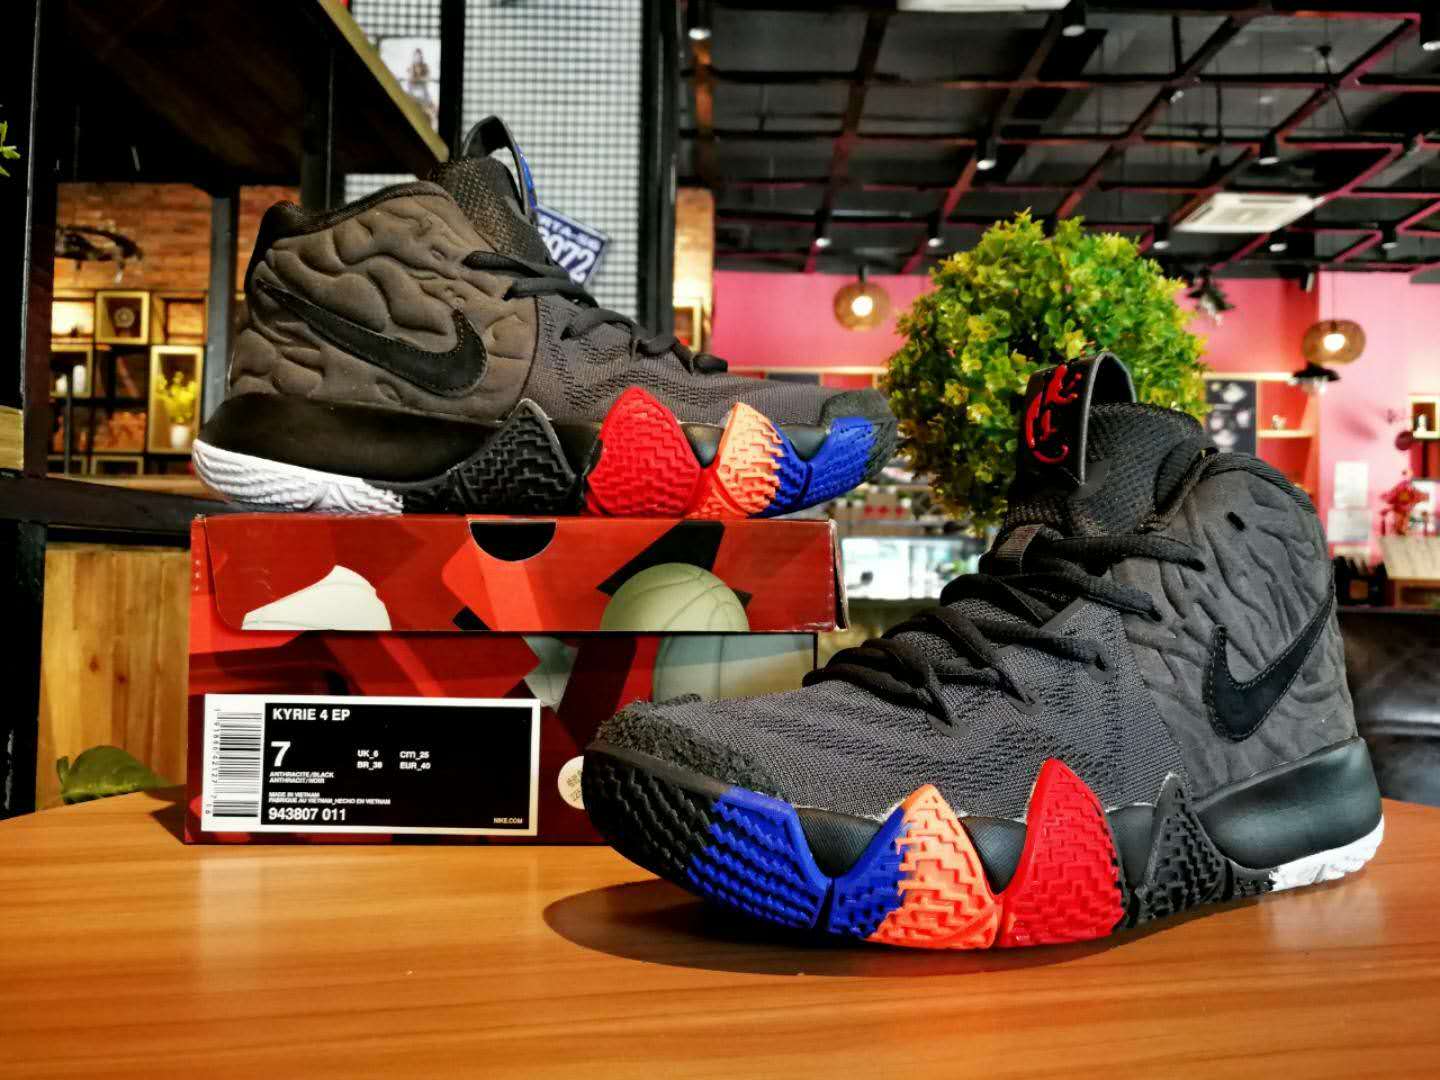 2018 Men Nike Kyrie 4 Year of the Monkey Shoes